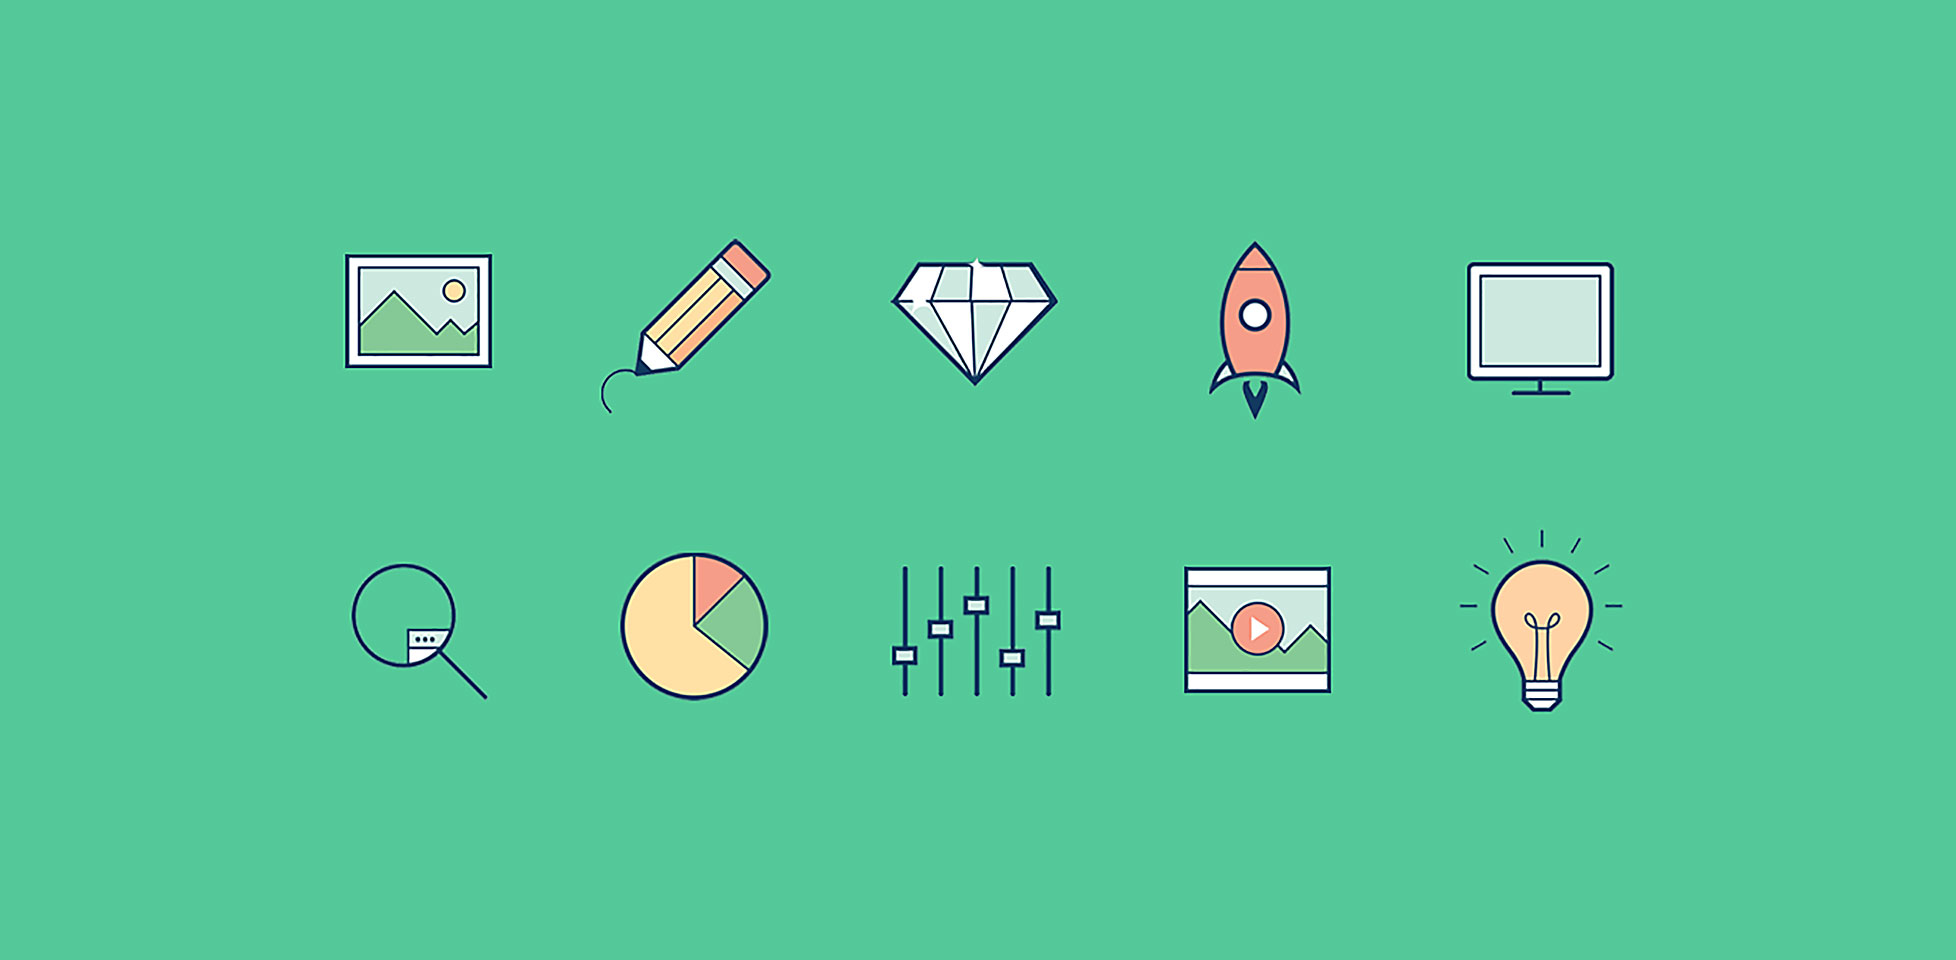 Download Free Download: 20 Animated Icons From Animaticons | Webdesigner Depot Webdesigner Depot » Blog ...